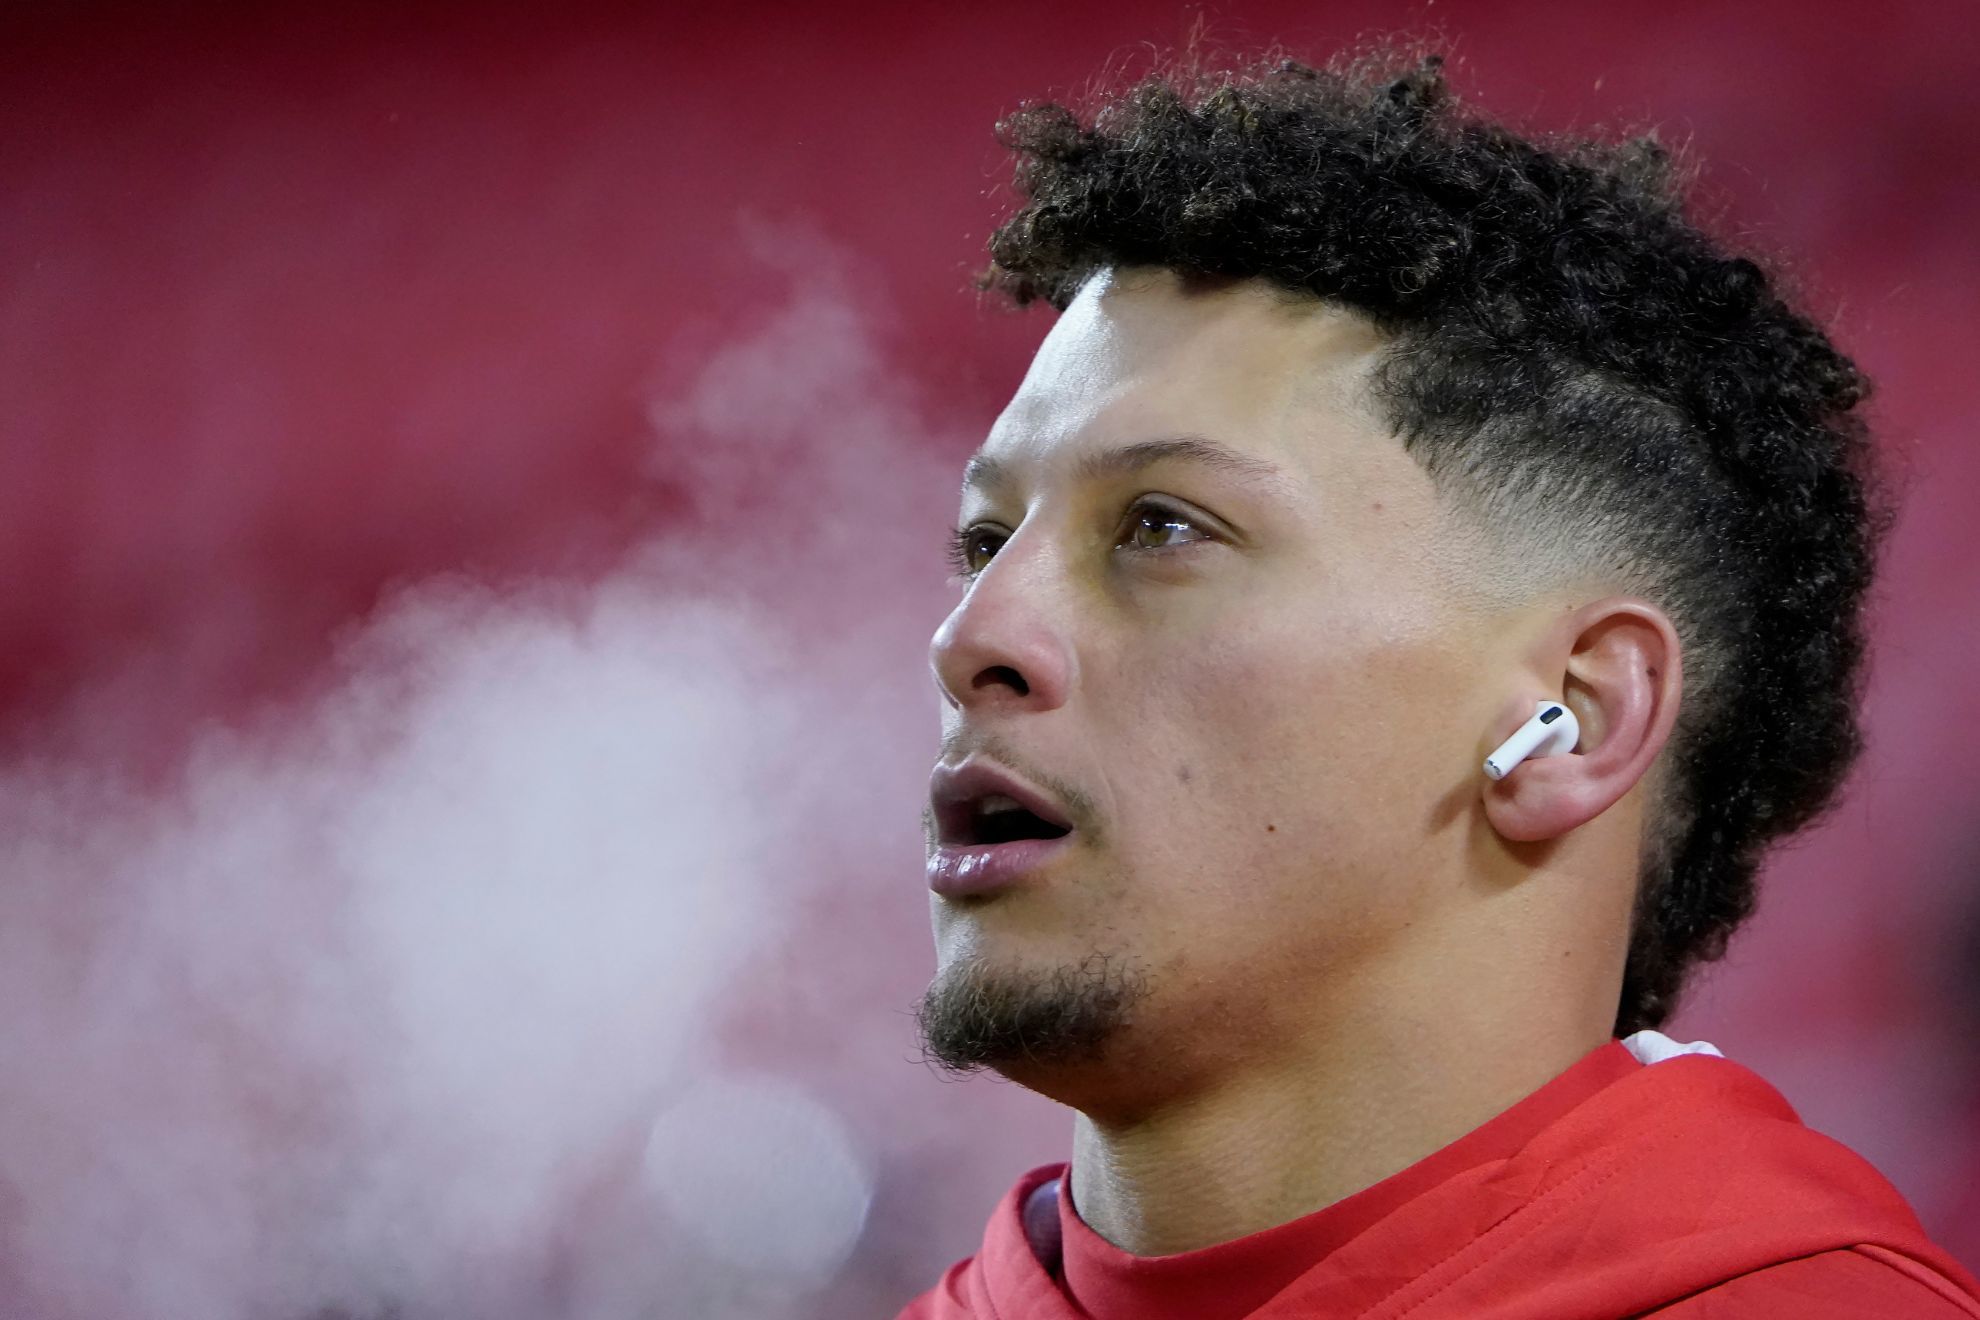 Patrick Mahomes unphased by frost: watches Browns-Texans on big screen